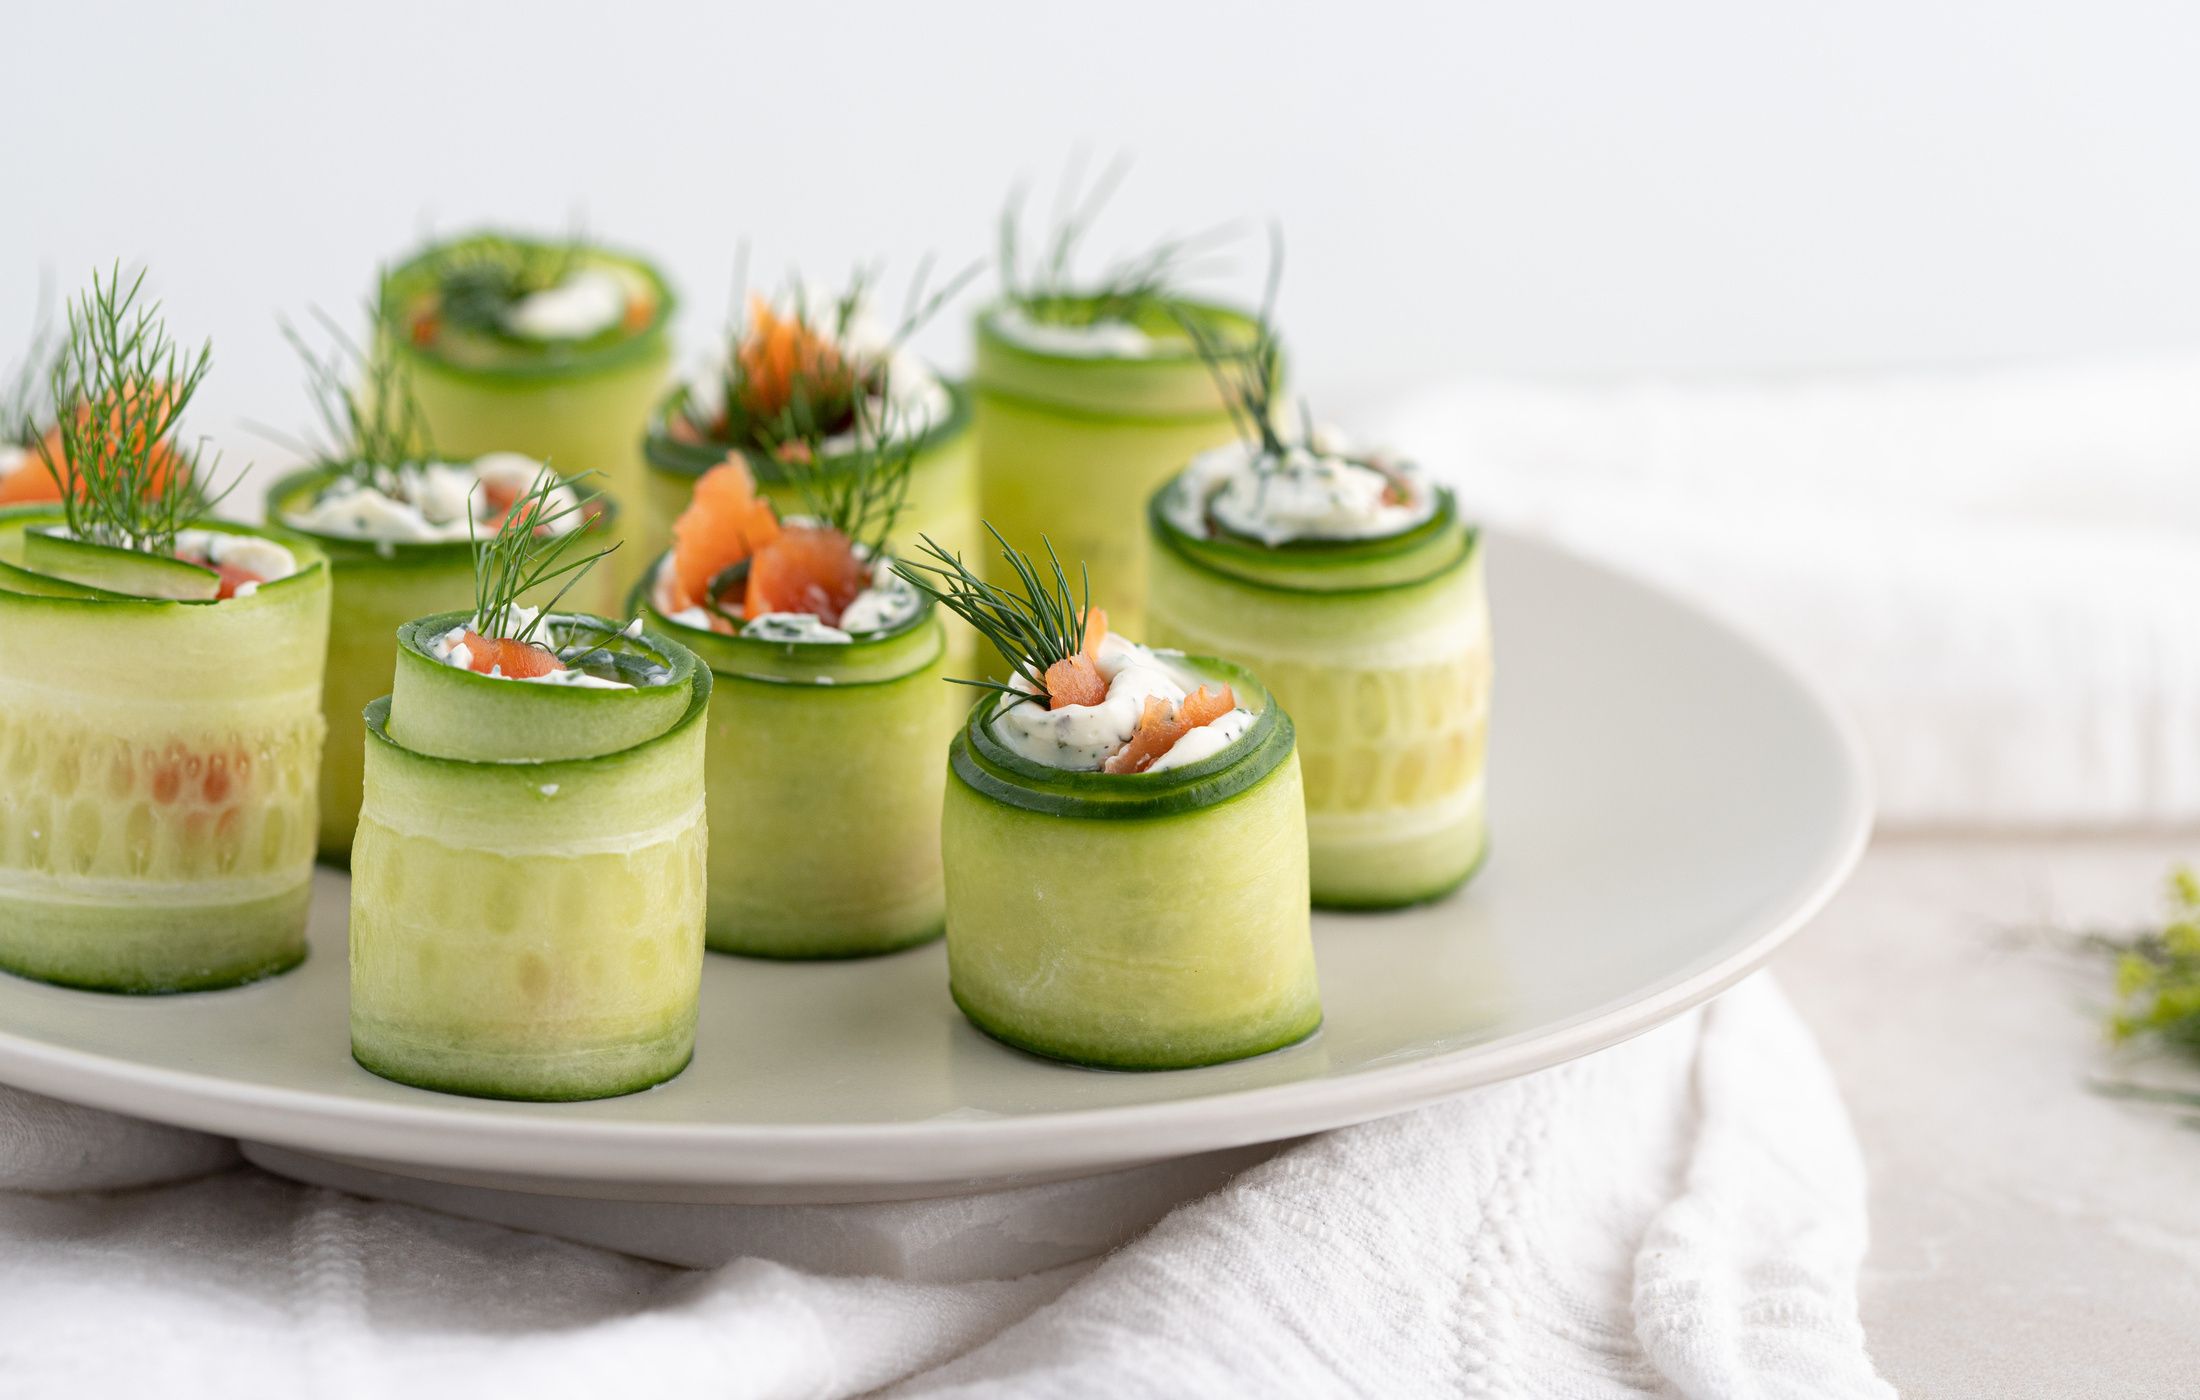 Cucumber Rolls with Smoked Salmon and Cream Cheese 